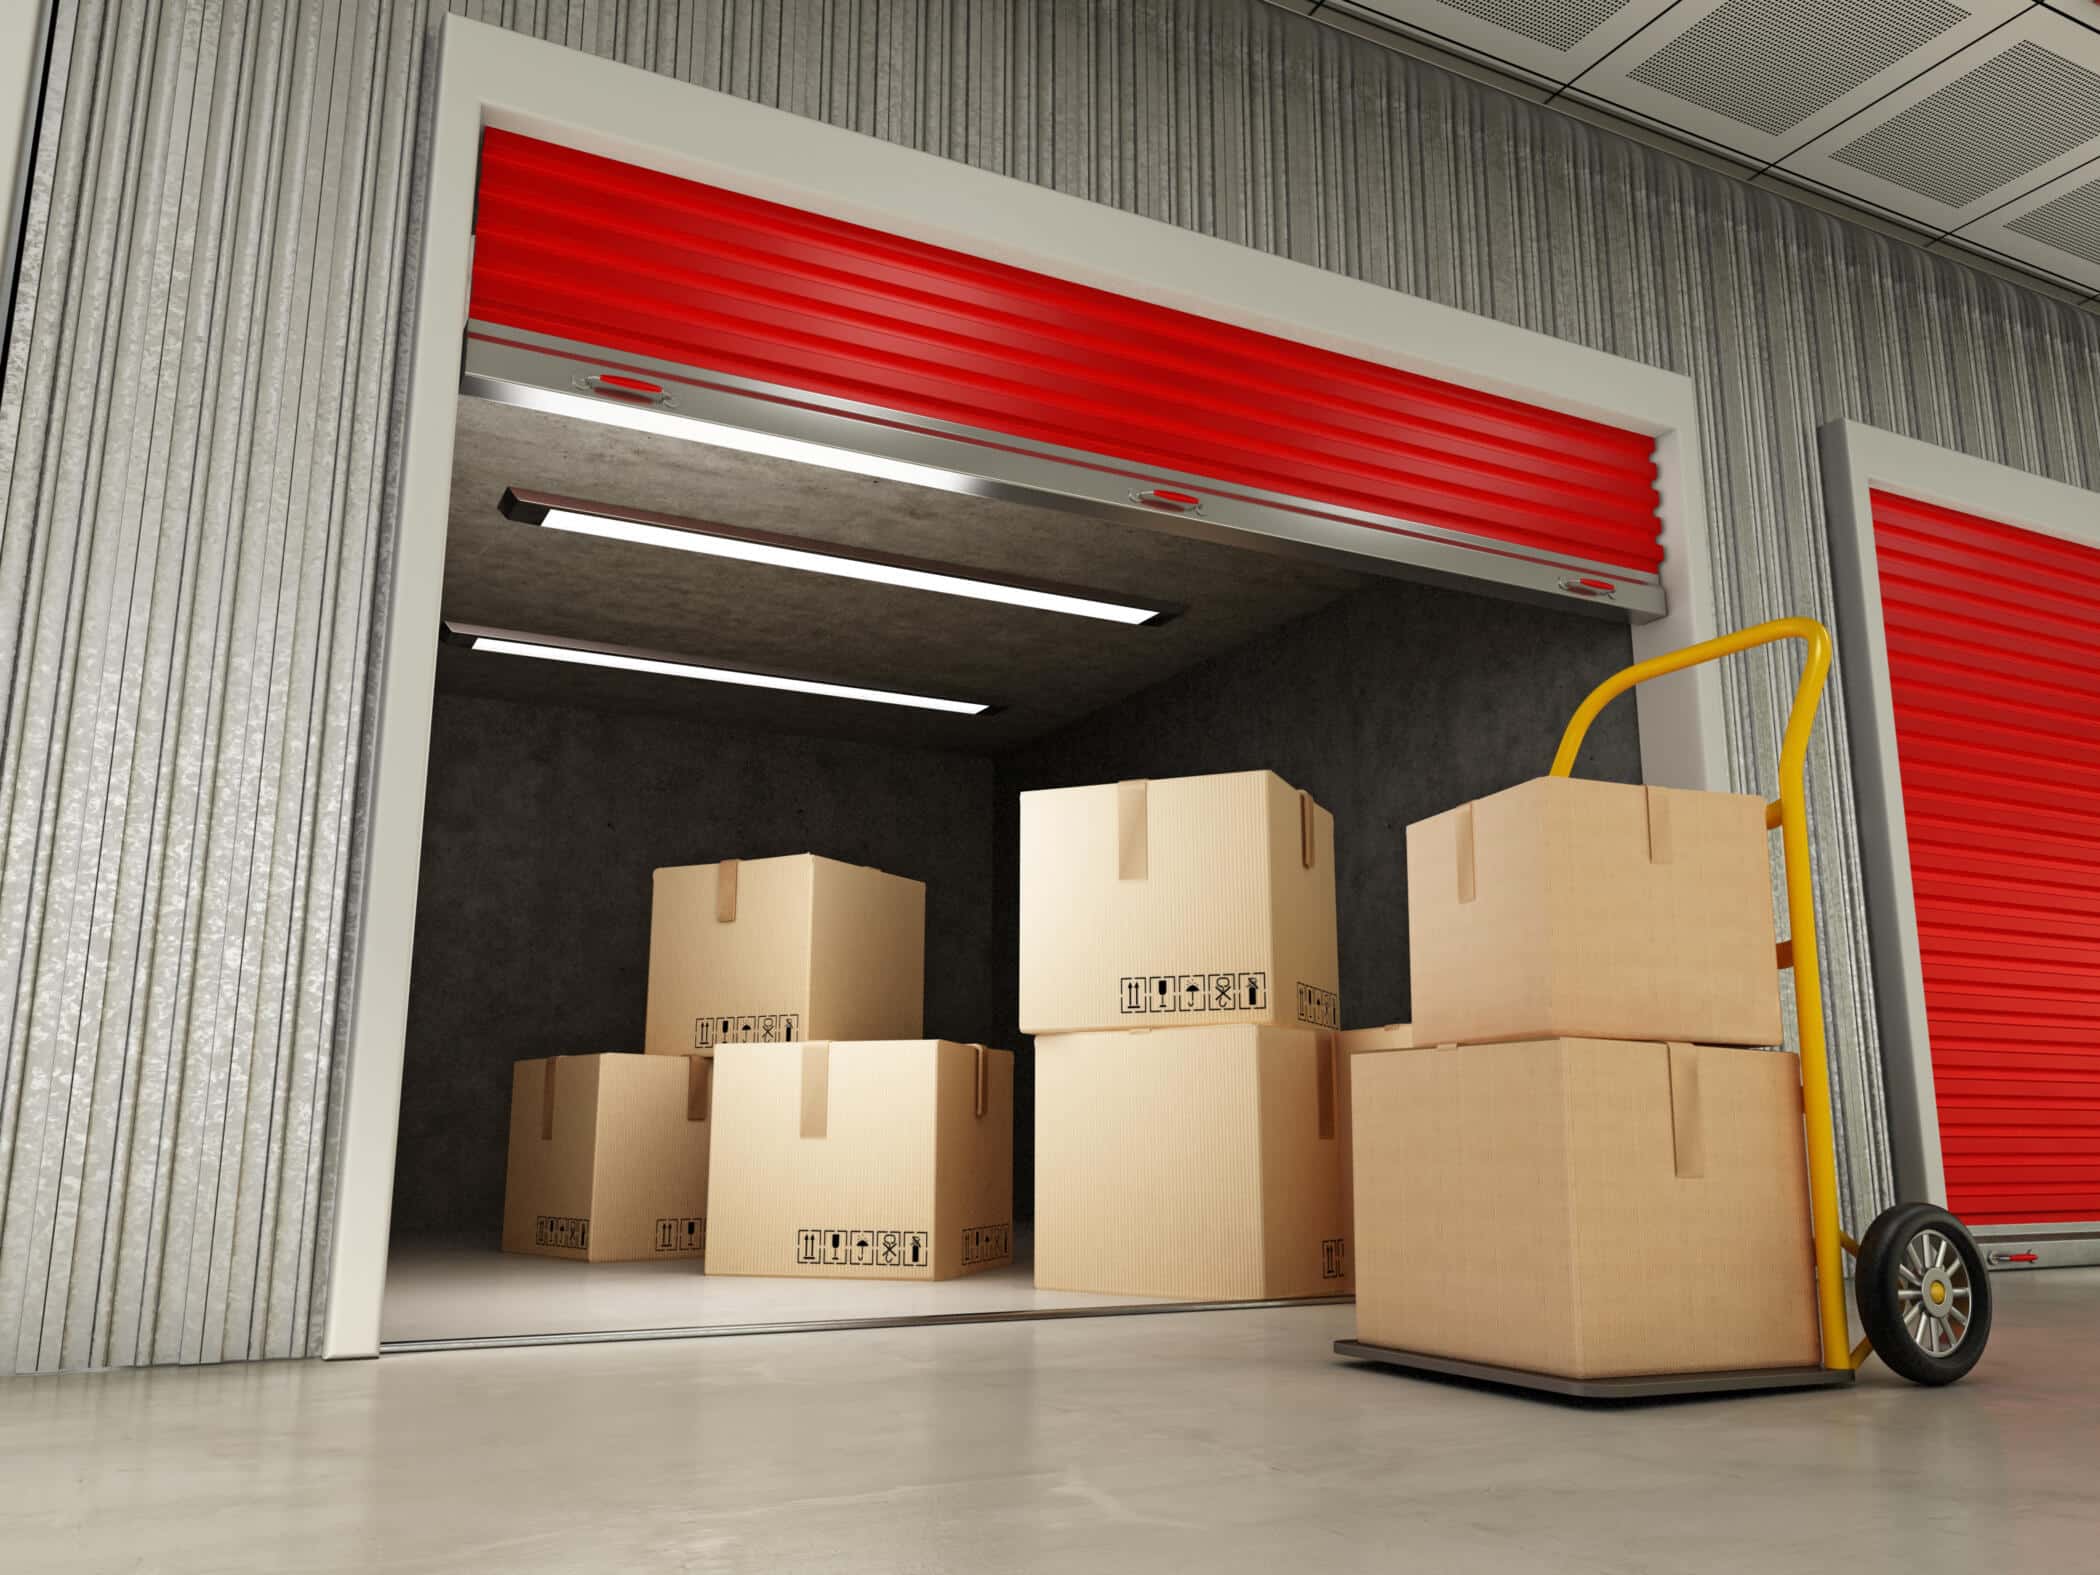 Storage Rental Provider Lifts Results with Better Targeting